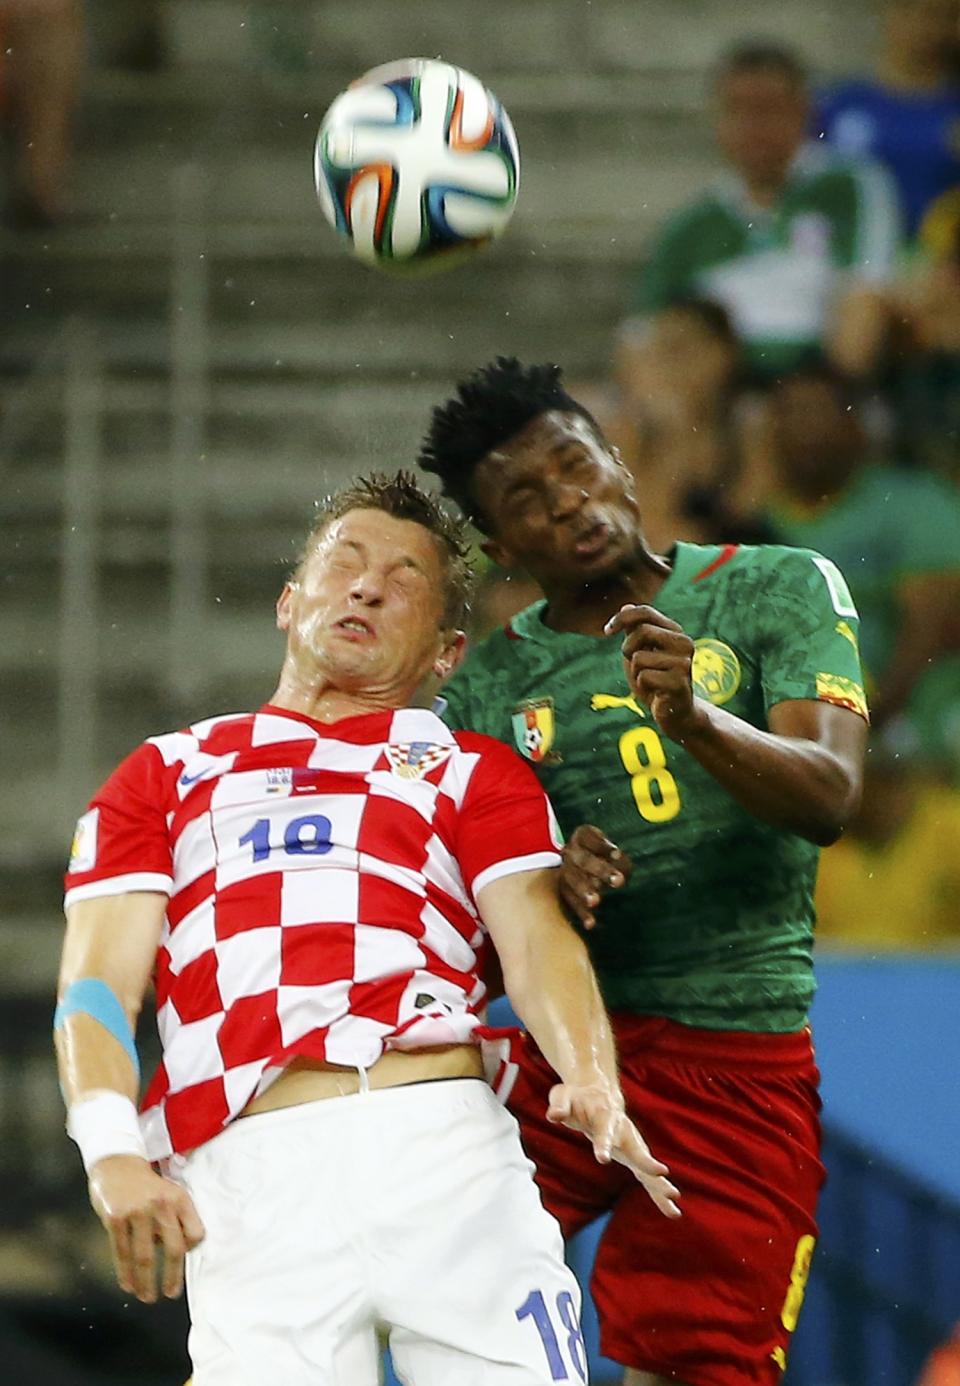 Croatia's Ivica Olic jumps for the ball with Cameroon's Benjamin Moukandjo during their 2014 World Cup Group A soccer match at the Amazonia arena in Manaus June 18, 2014. REUTERS/Murad Sezer